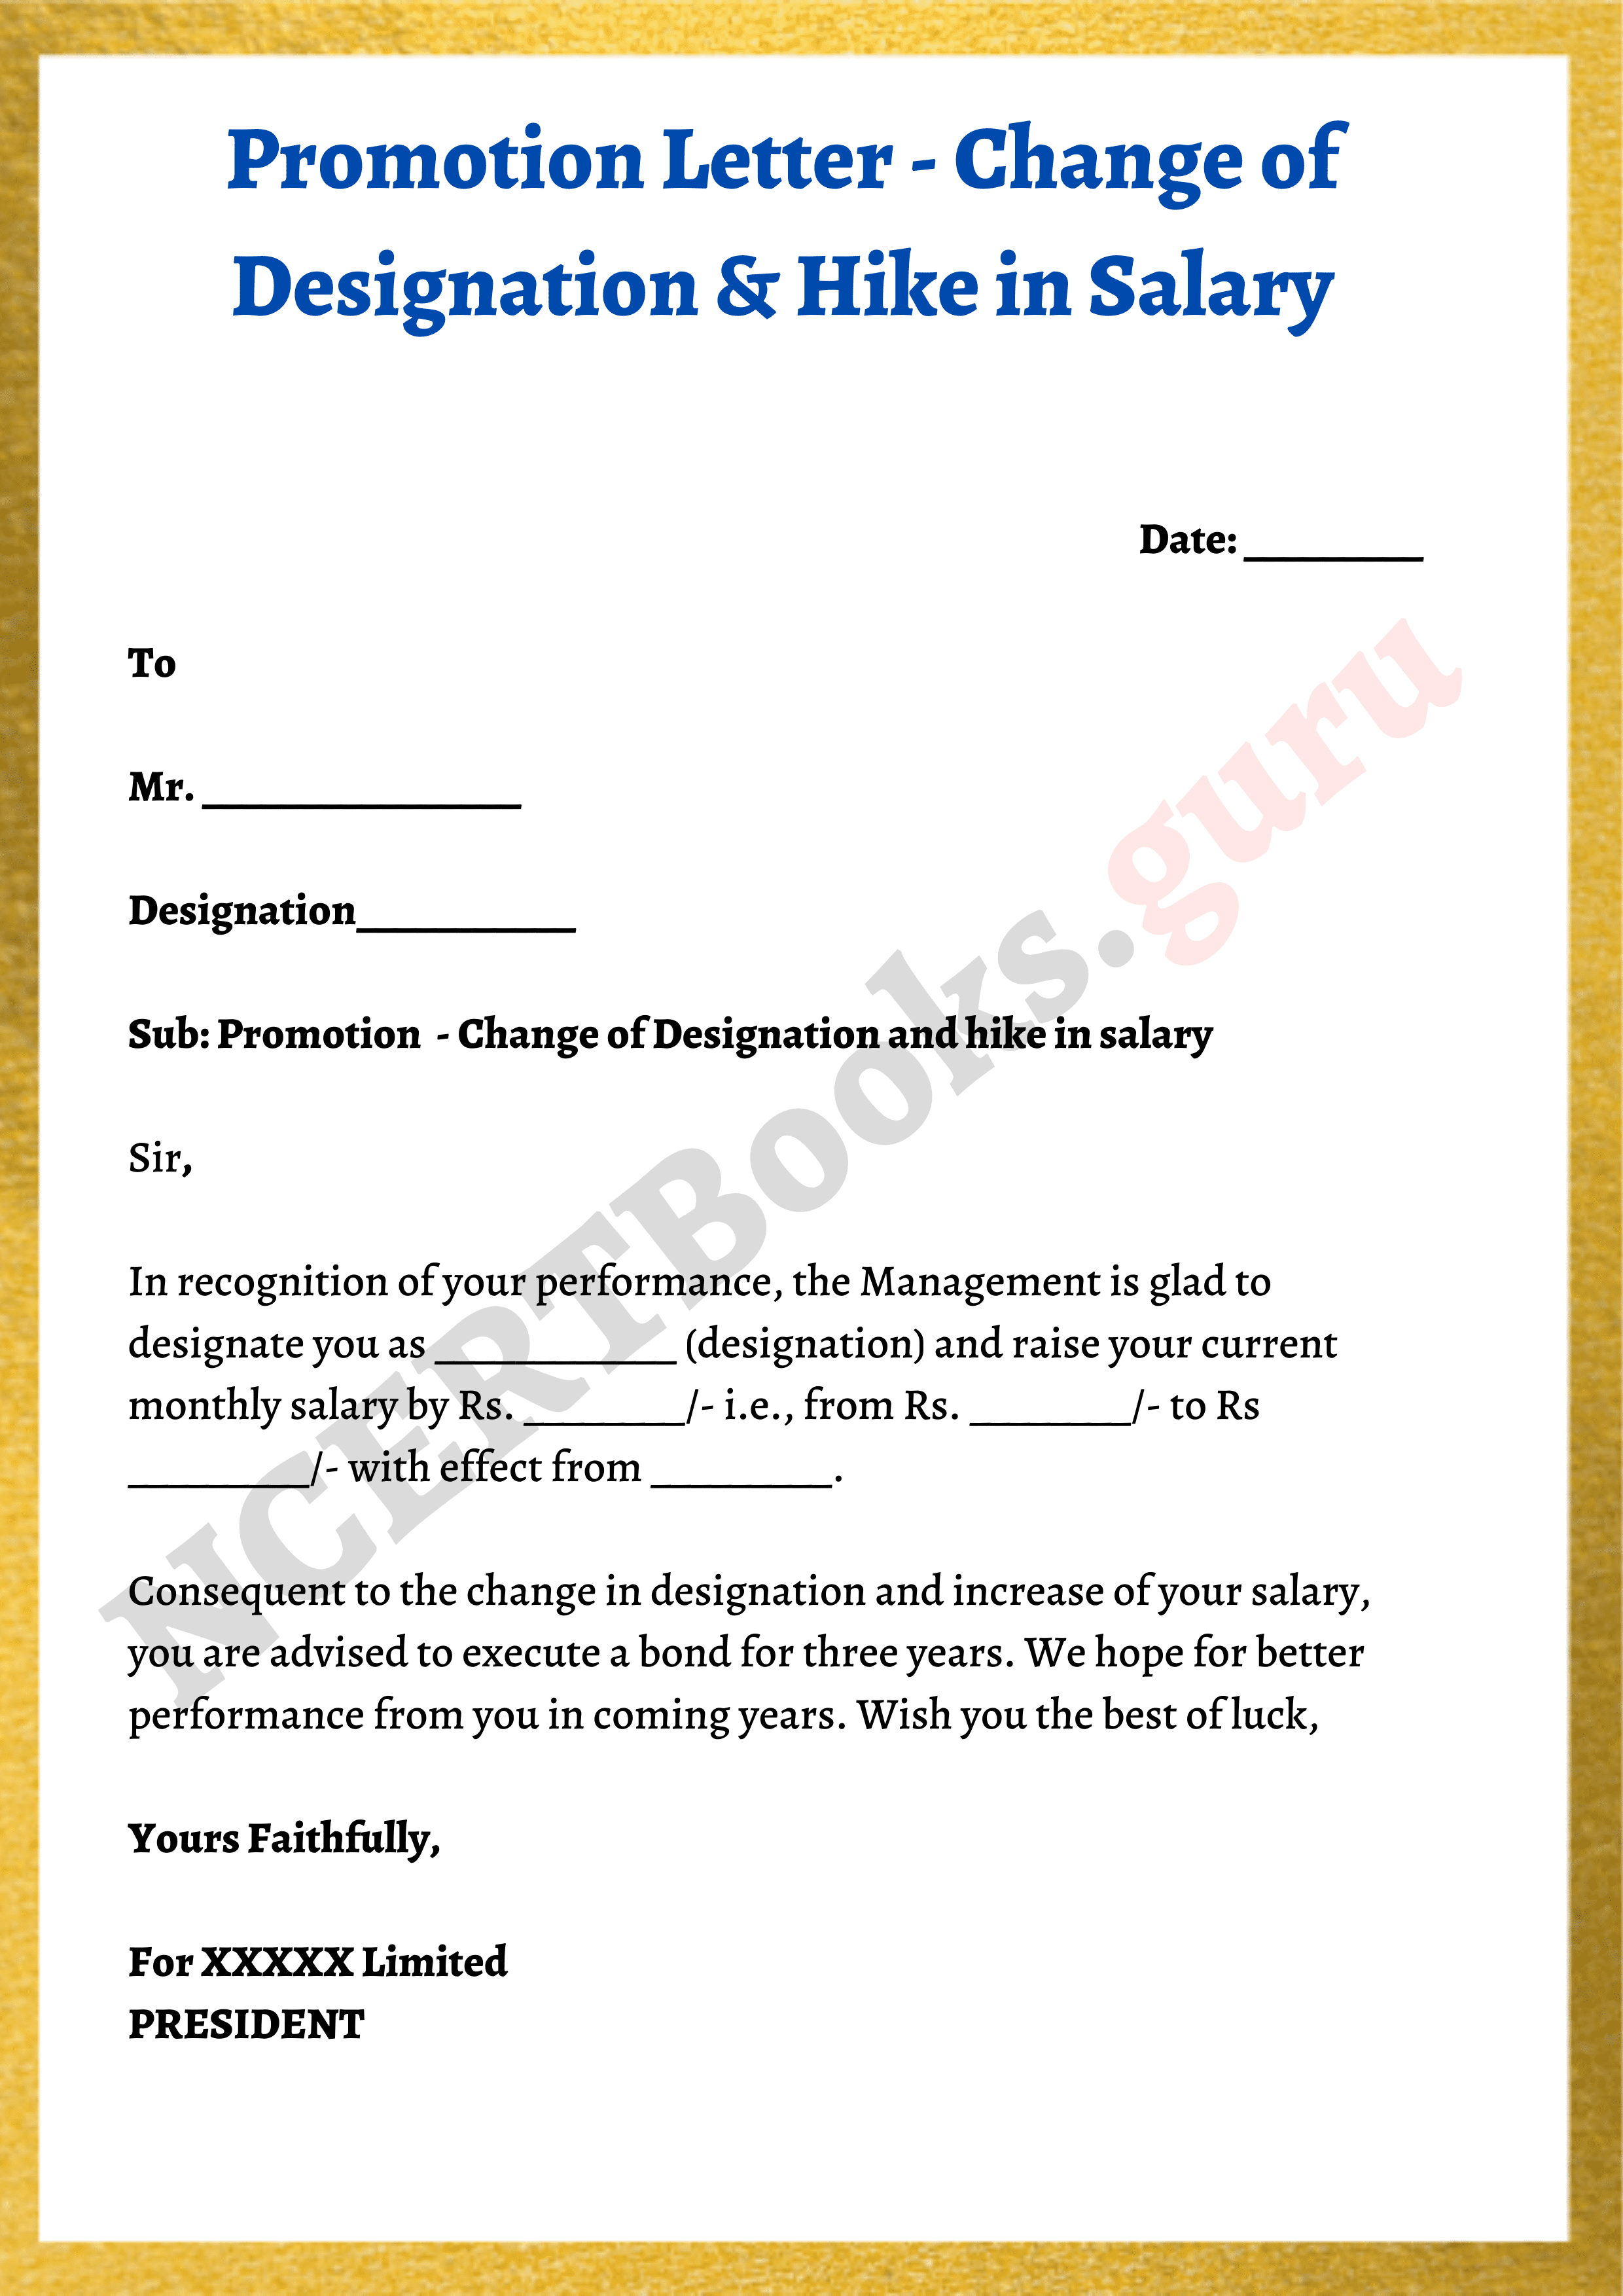 Promotion Letter Change of Designation and Hike in Salary